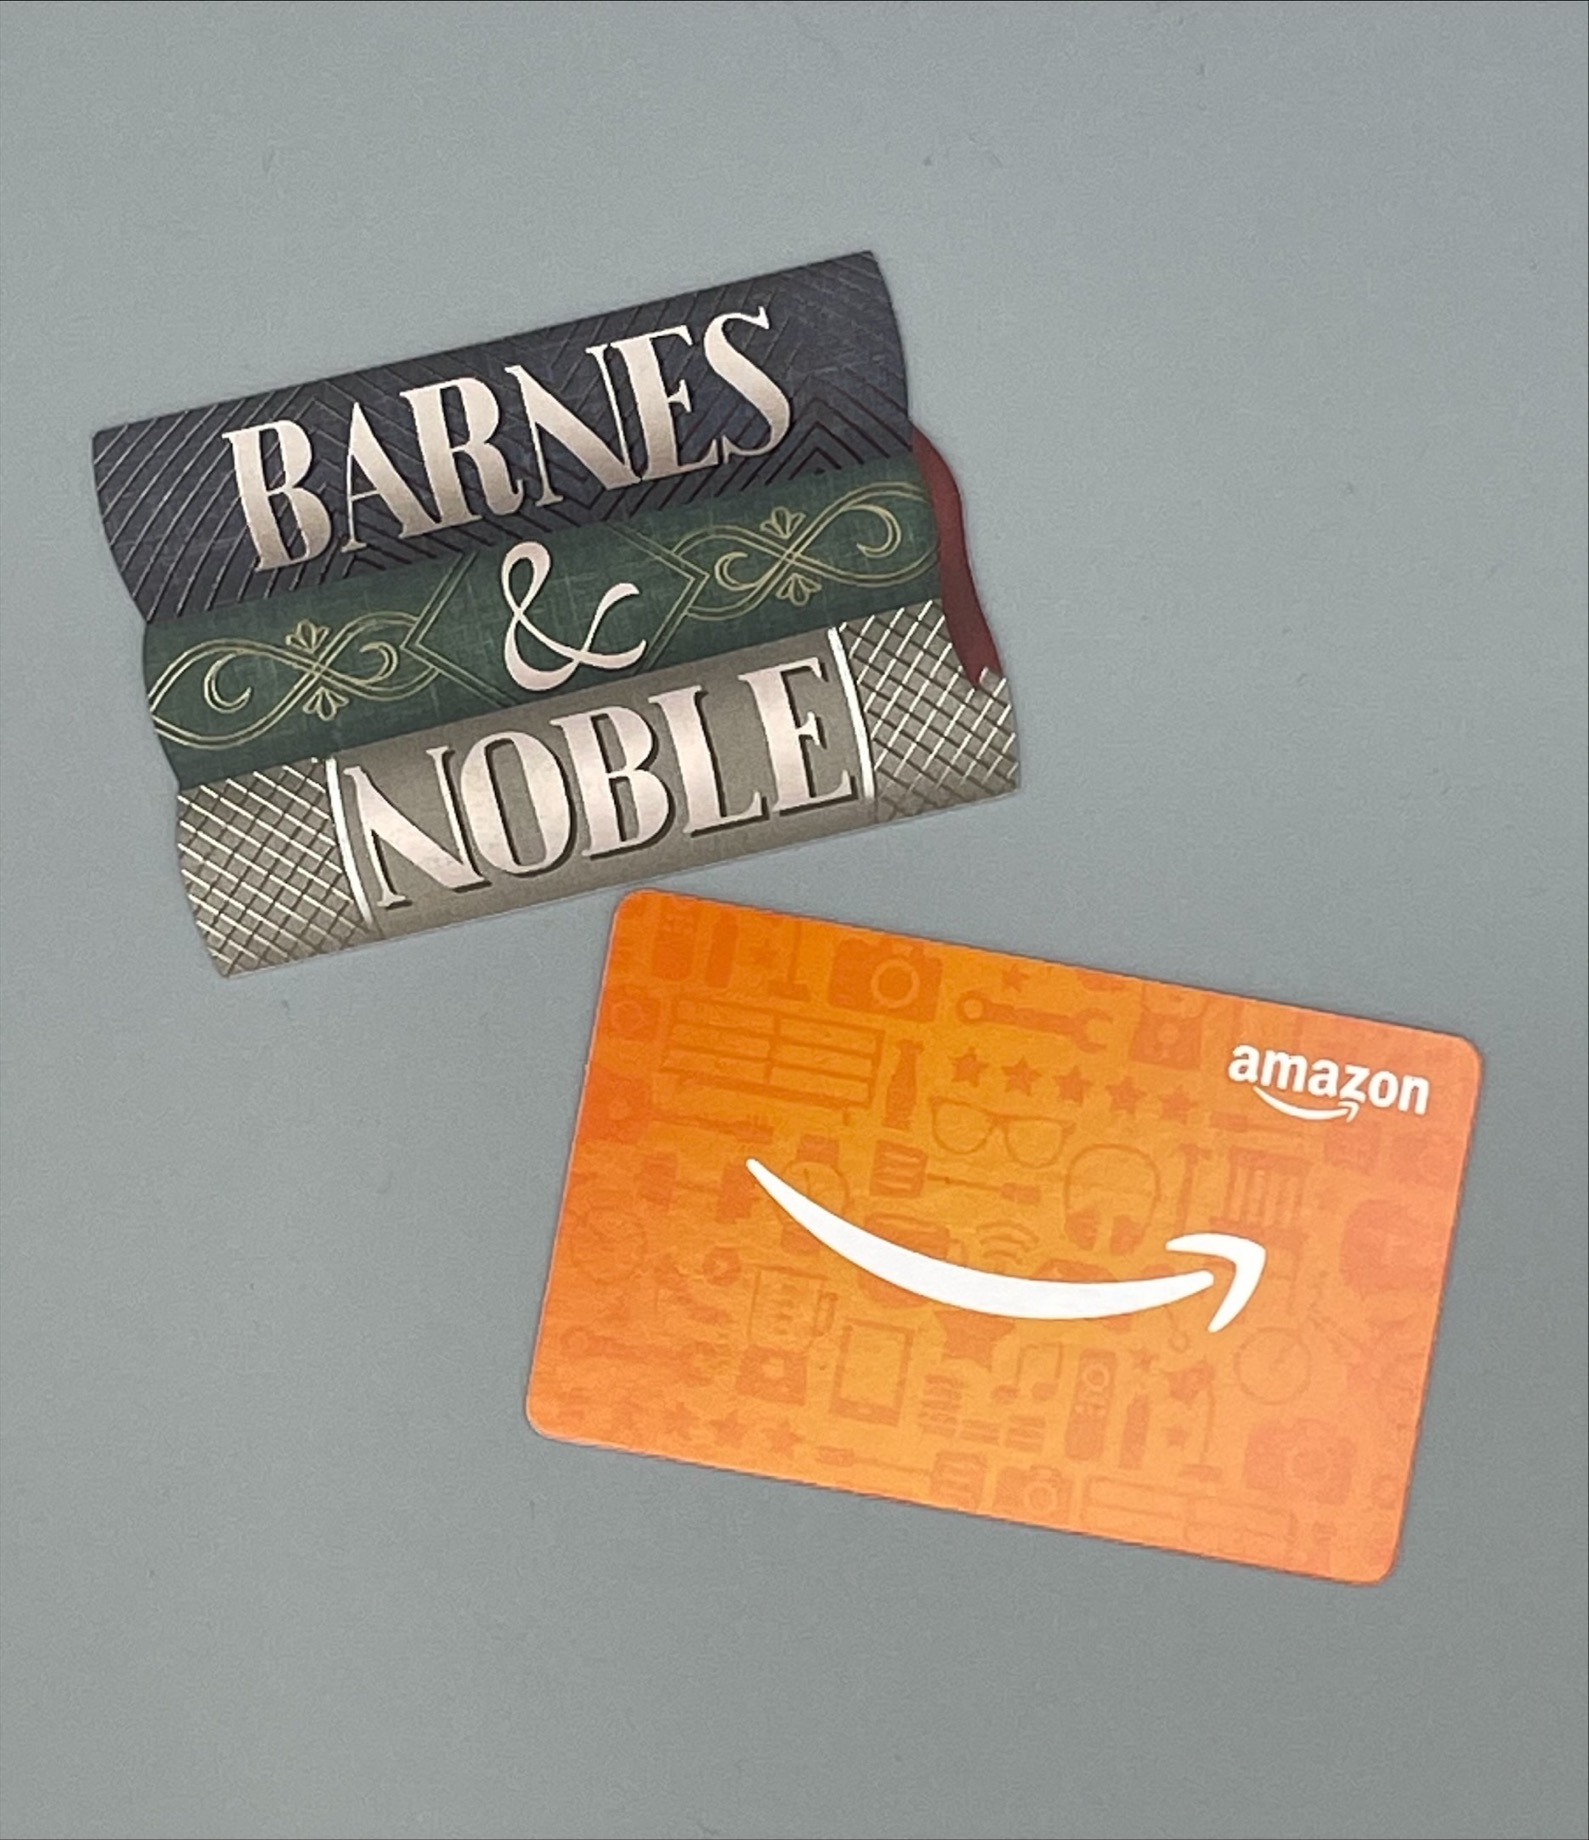 Teen Weekly Prizes, $75 gift cards to Barnes & Noble and Amazon